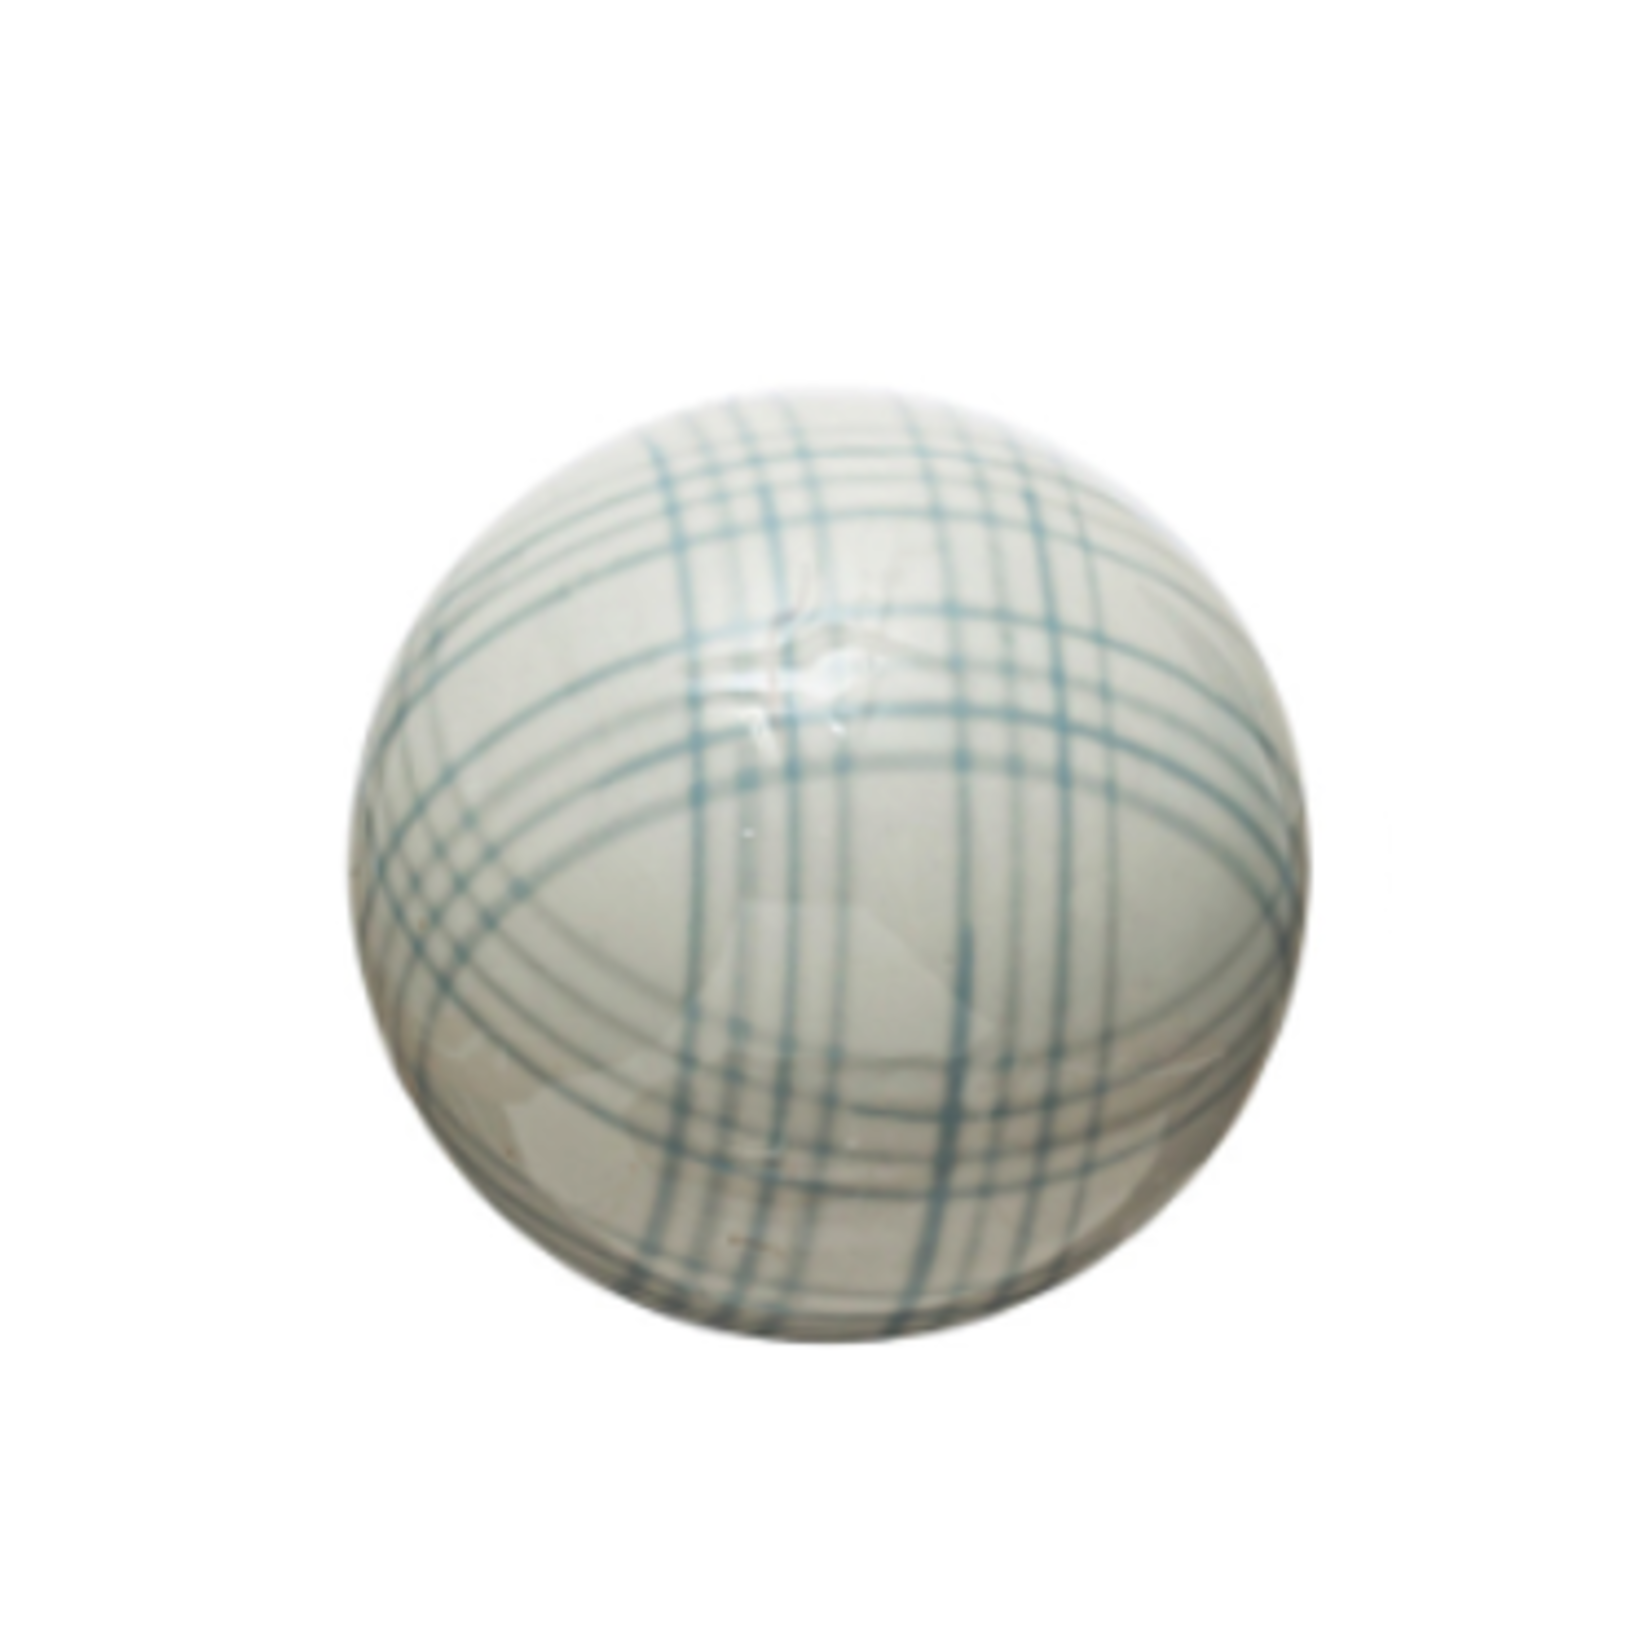 Outside The Box 3" White & Blue Hand-painted Ceramic Decorative Orb - SOLD SEPARATELY